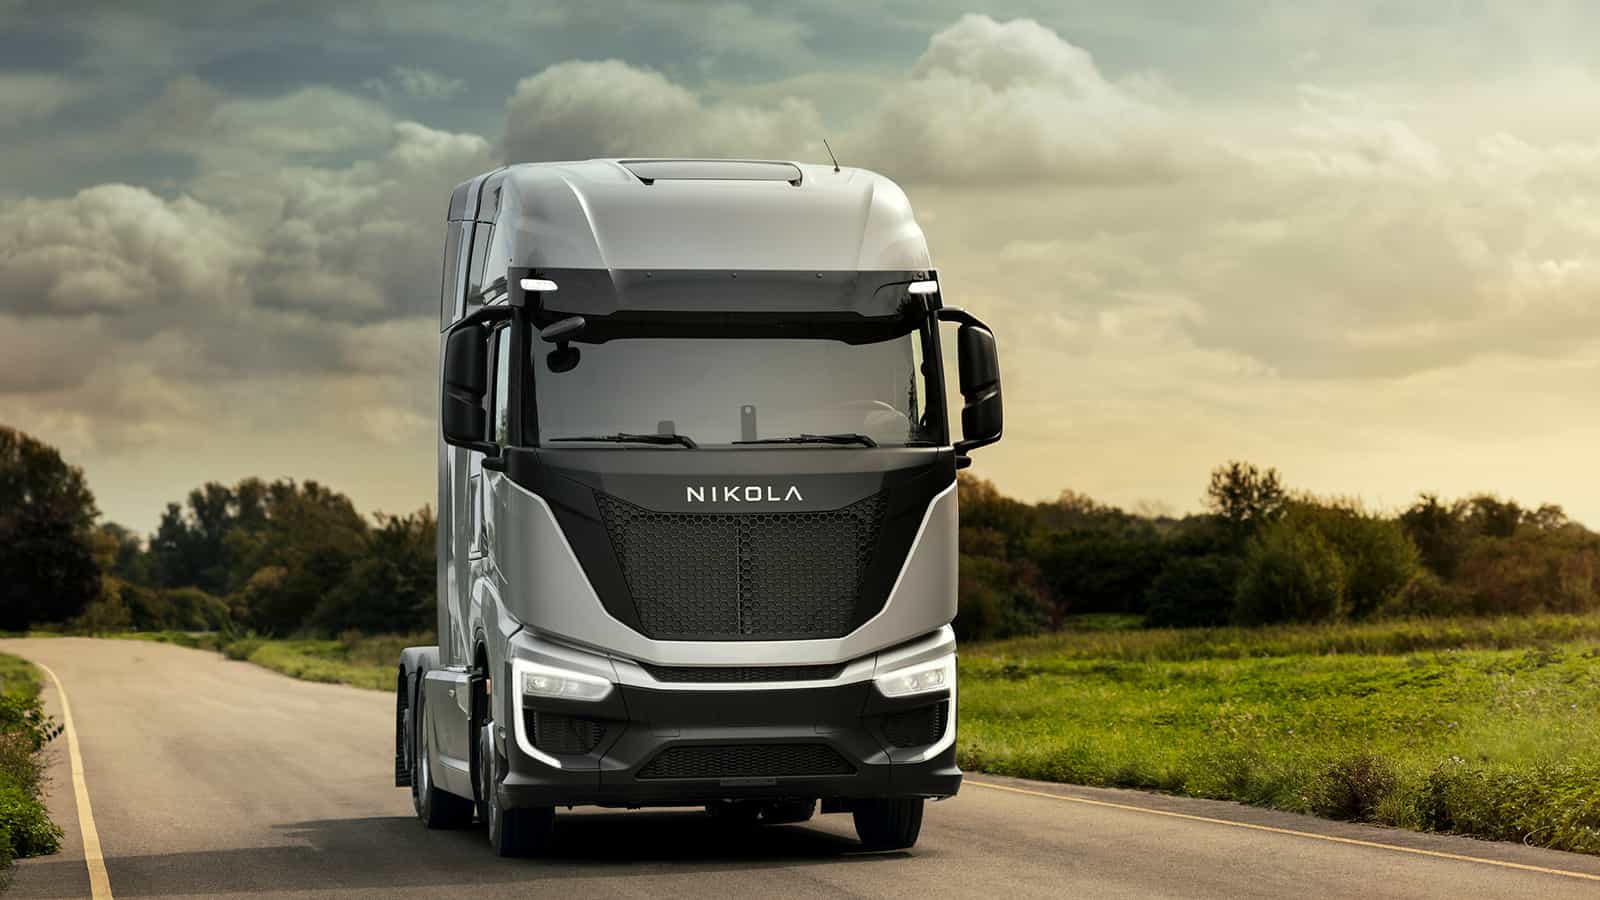 Nikola continues to grow its footprint in the real-world electric truck market with a new order for 100 fuel-cell semis from GP JOULE.